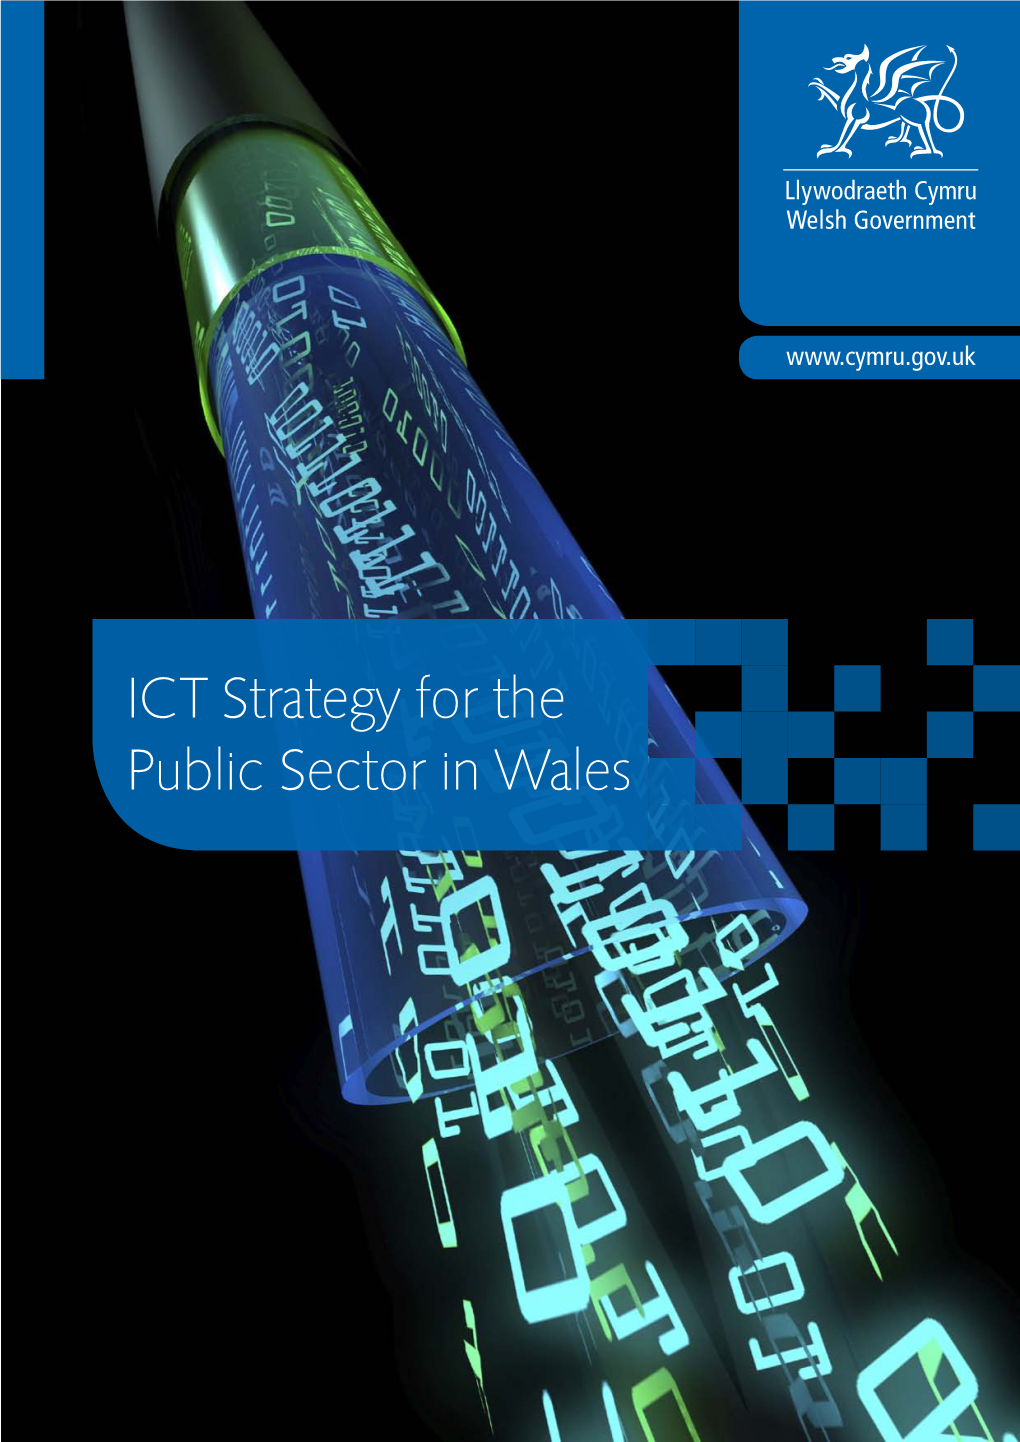 ICT Strategy for the Public Sector